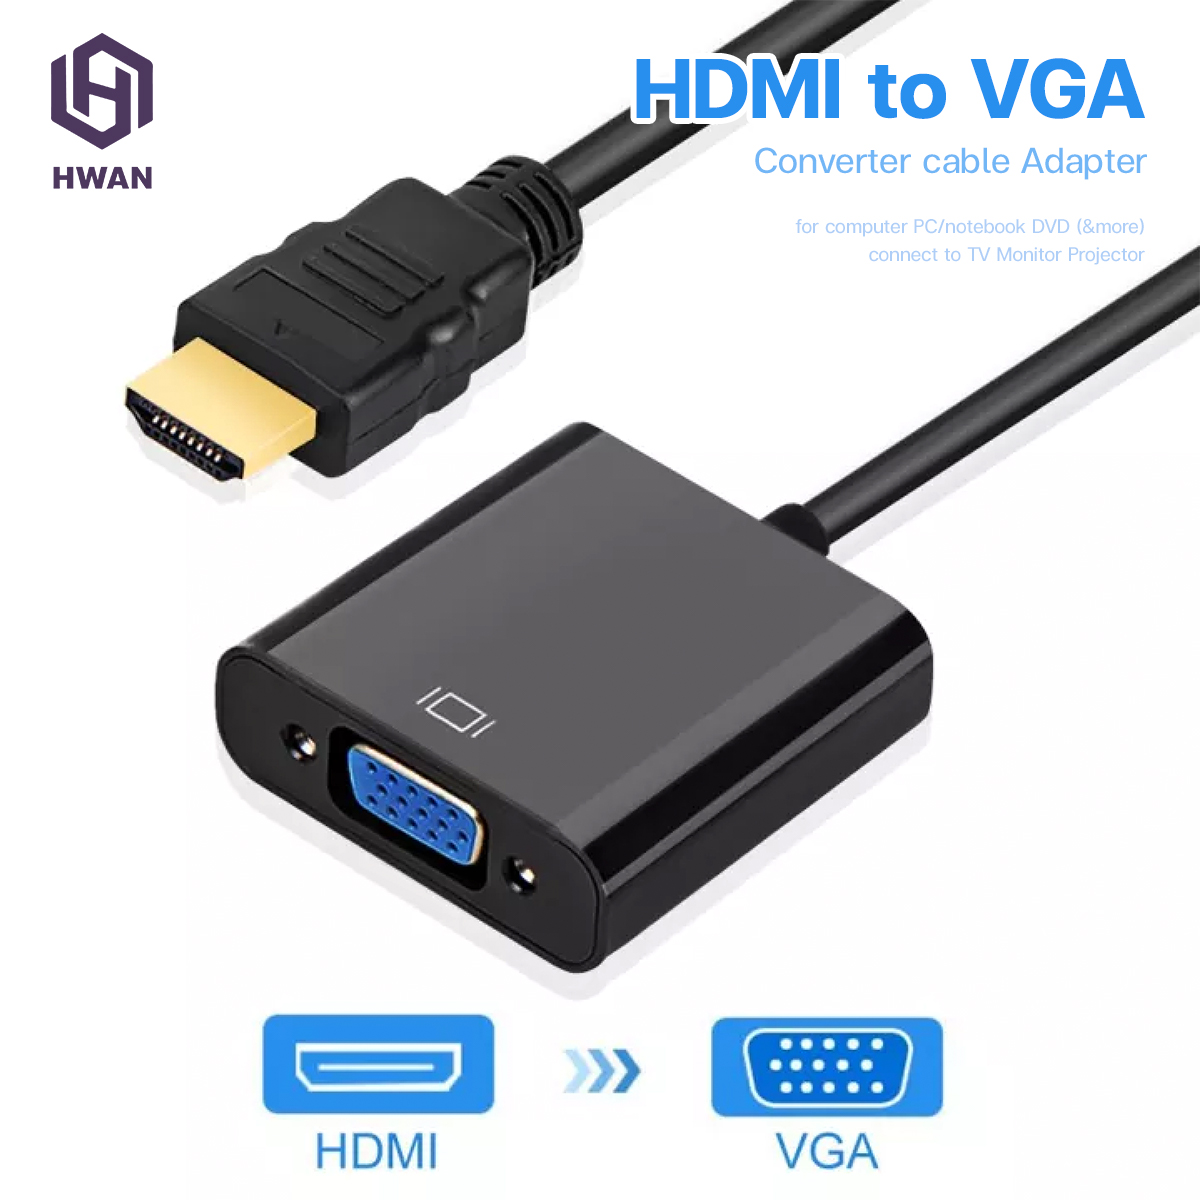 HDMI to VGA สายแปลง HDMI to VGA สายแปลงสัญญาณ จาก HDMI ออก VGA เฉพาะภาพ HDMI to VGA Converter cable Adapter for computer PC/notebook DVD (&more) connect to TV Monitor Projector #T3